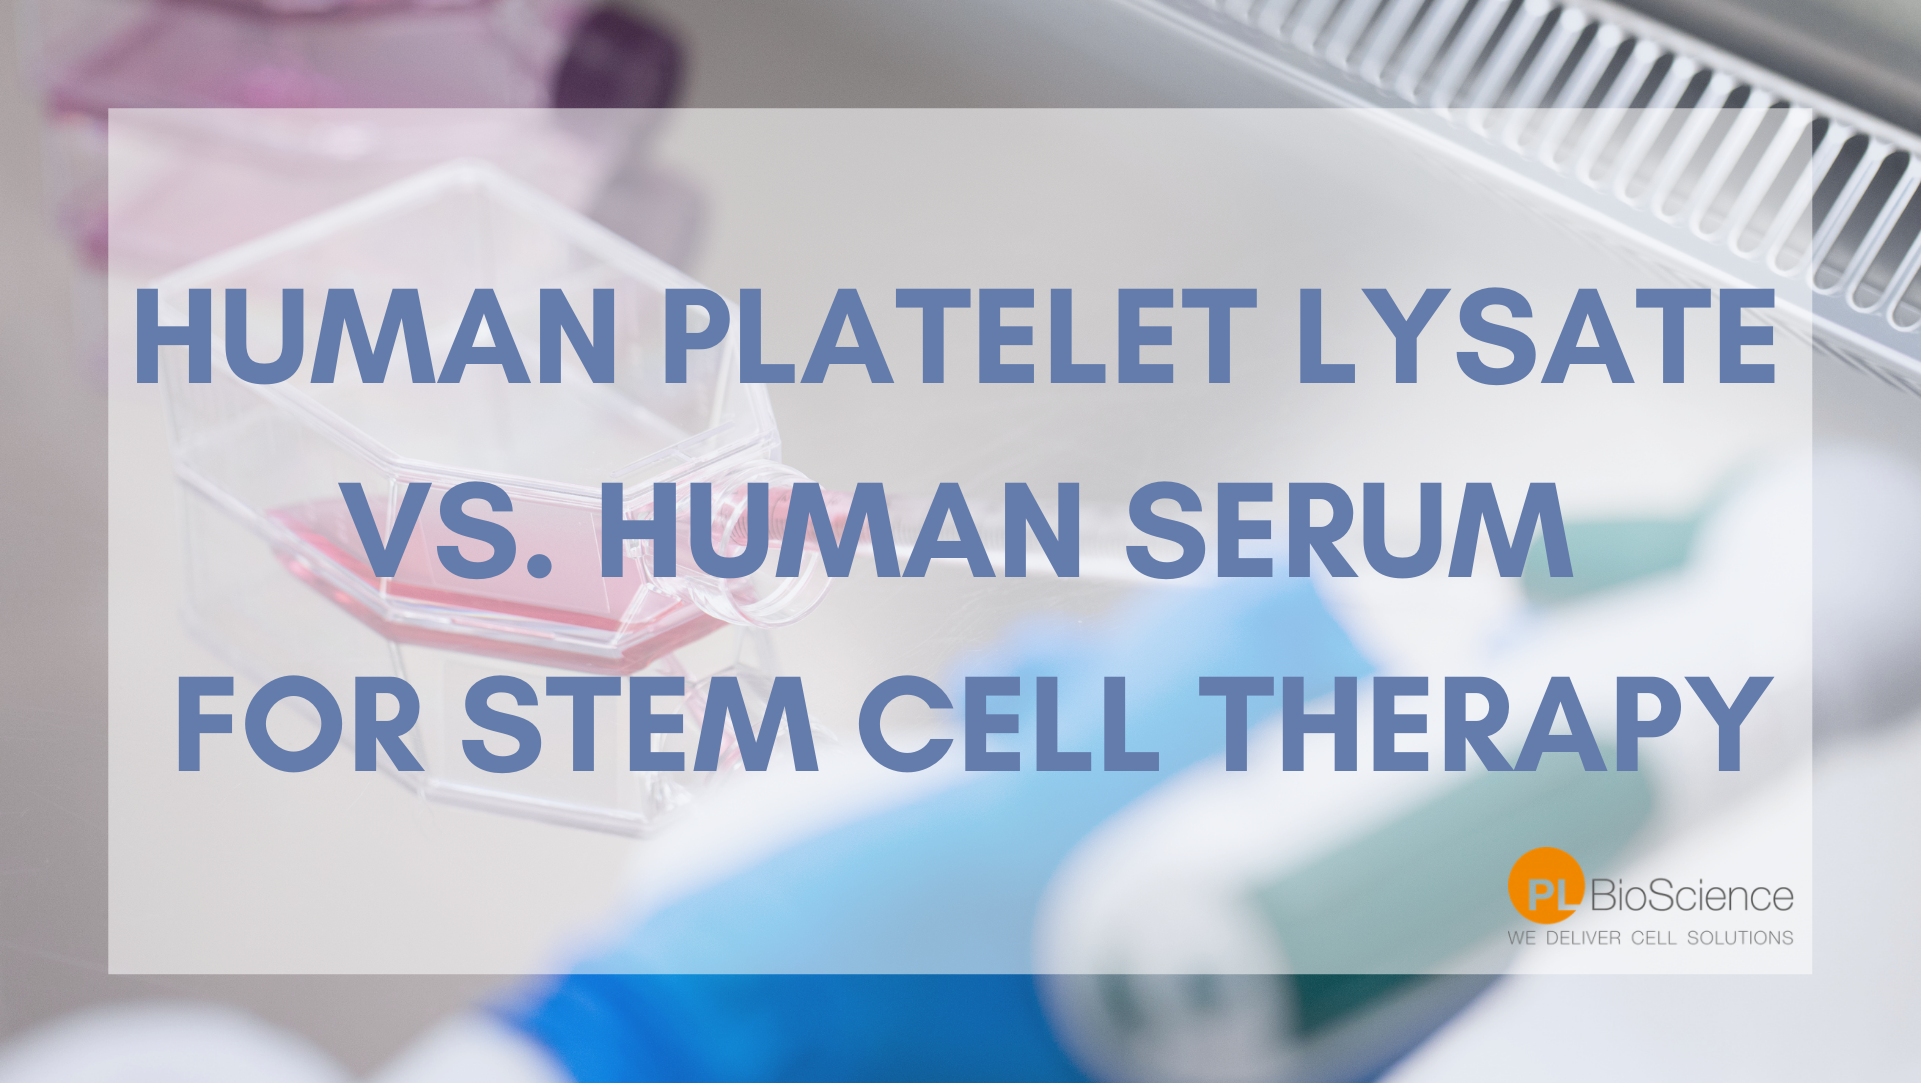 Human Platelet Lysate versus Human Serum for cell therapy